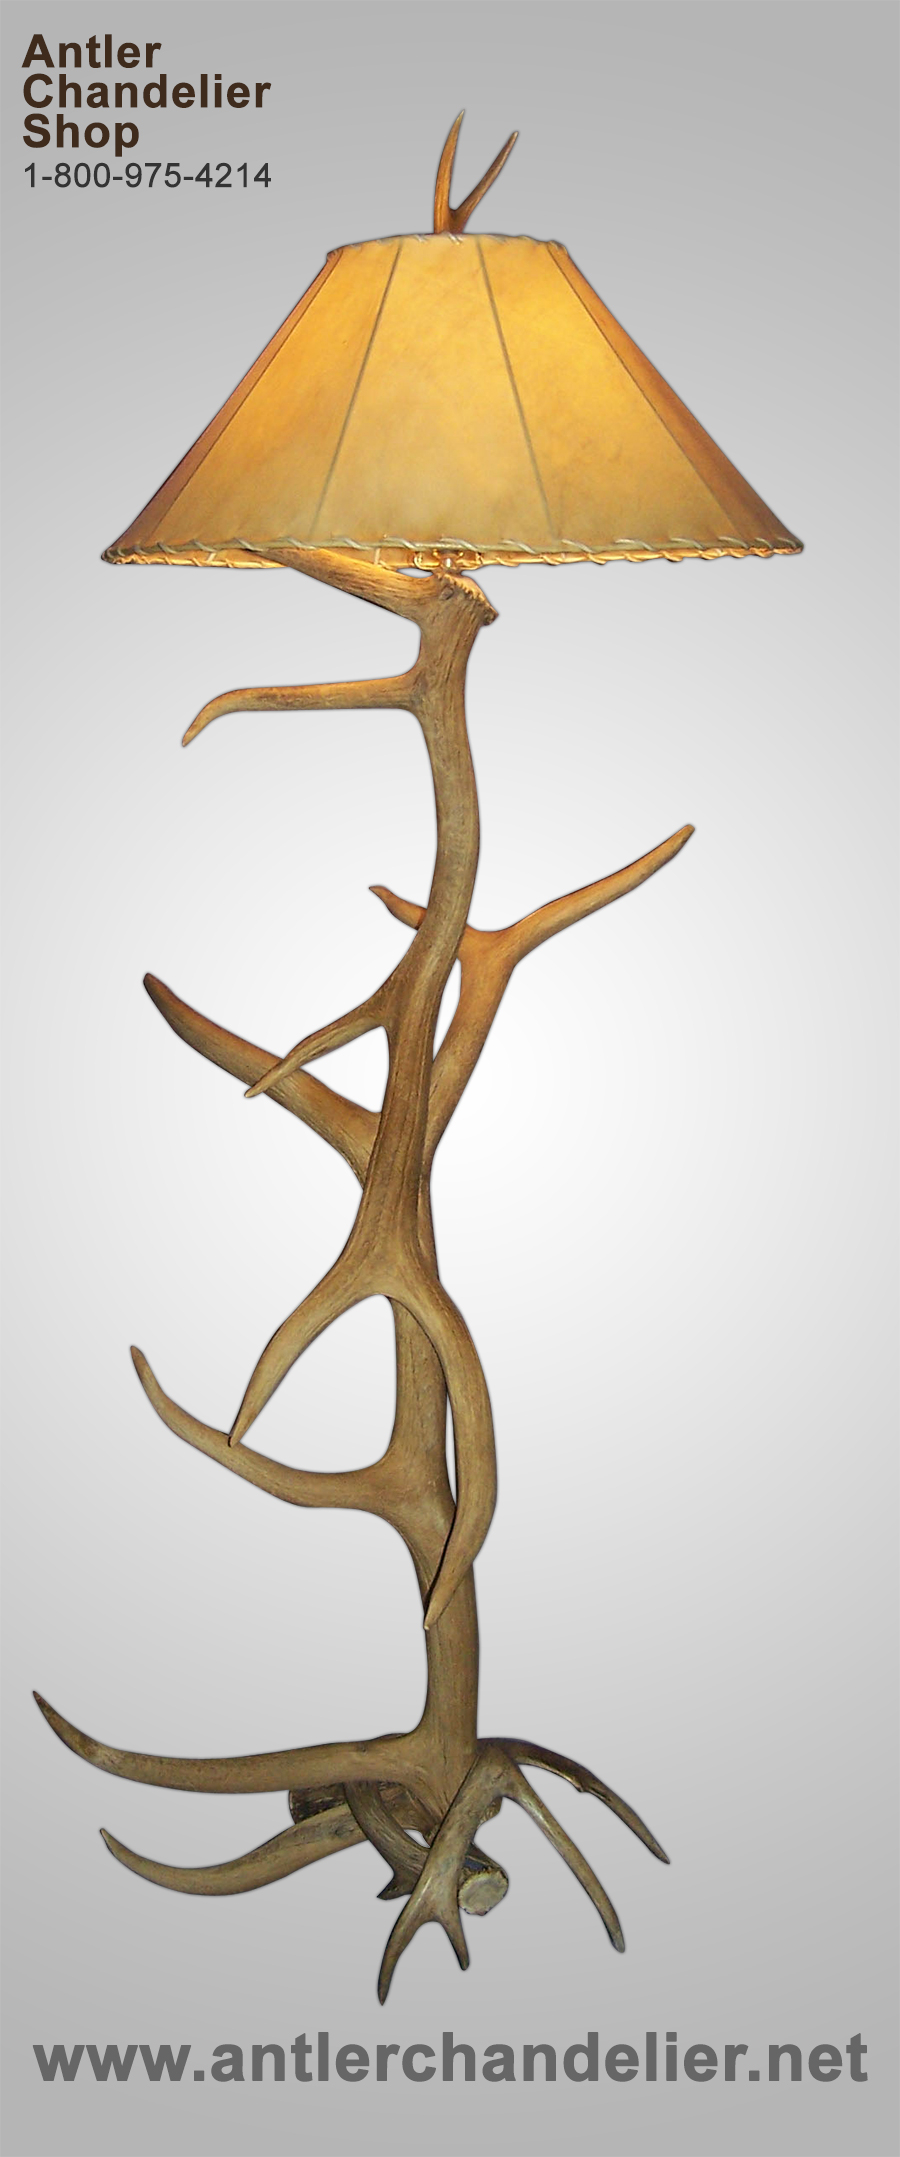 Details About Elkwhite Tail Deer Antler Floor Lamp Rustic Chandelier Lighting within sizing 900 X 2157